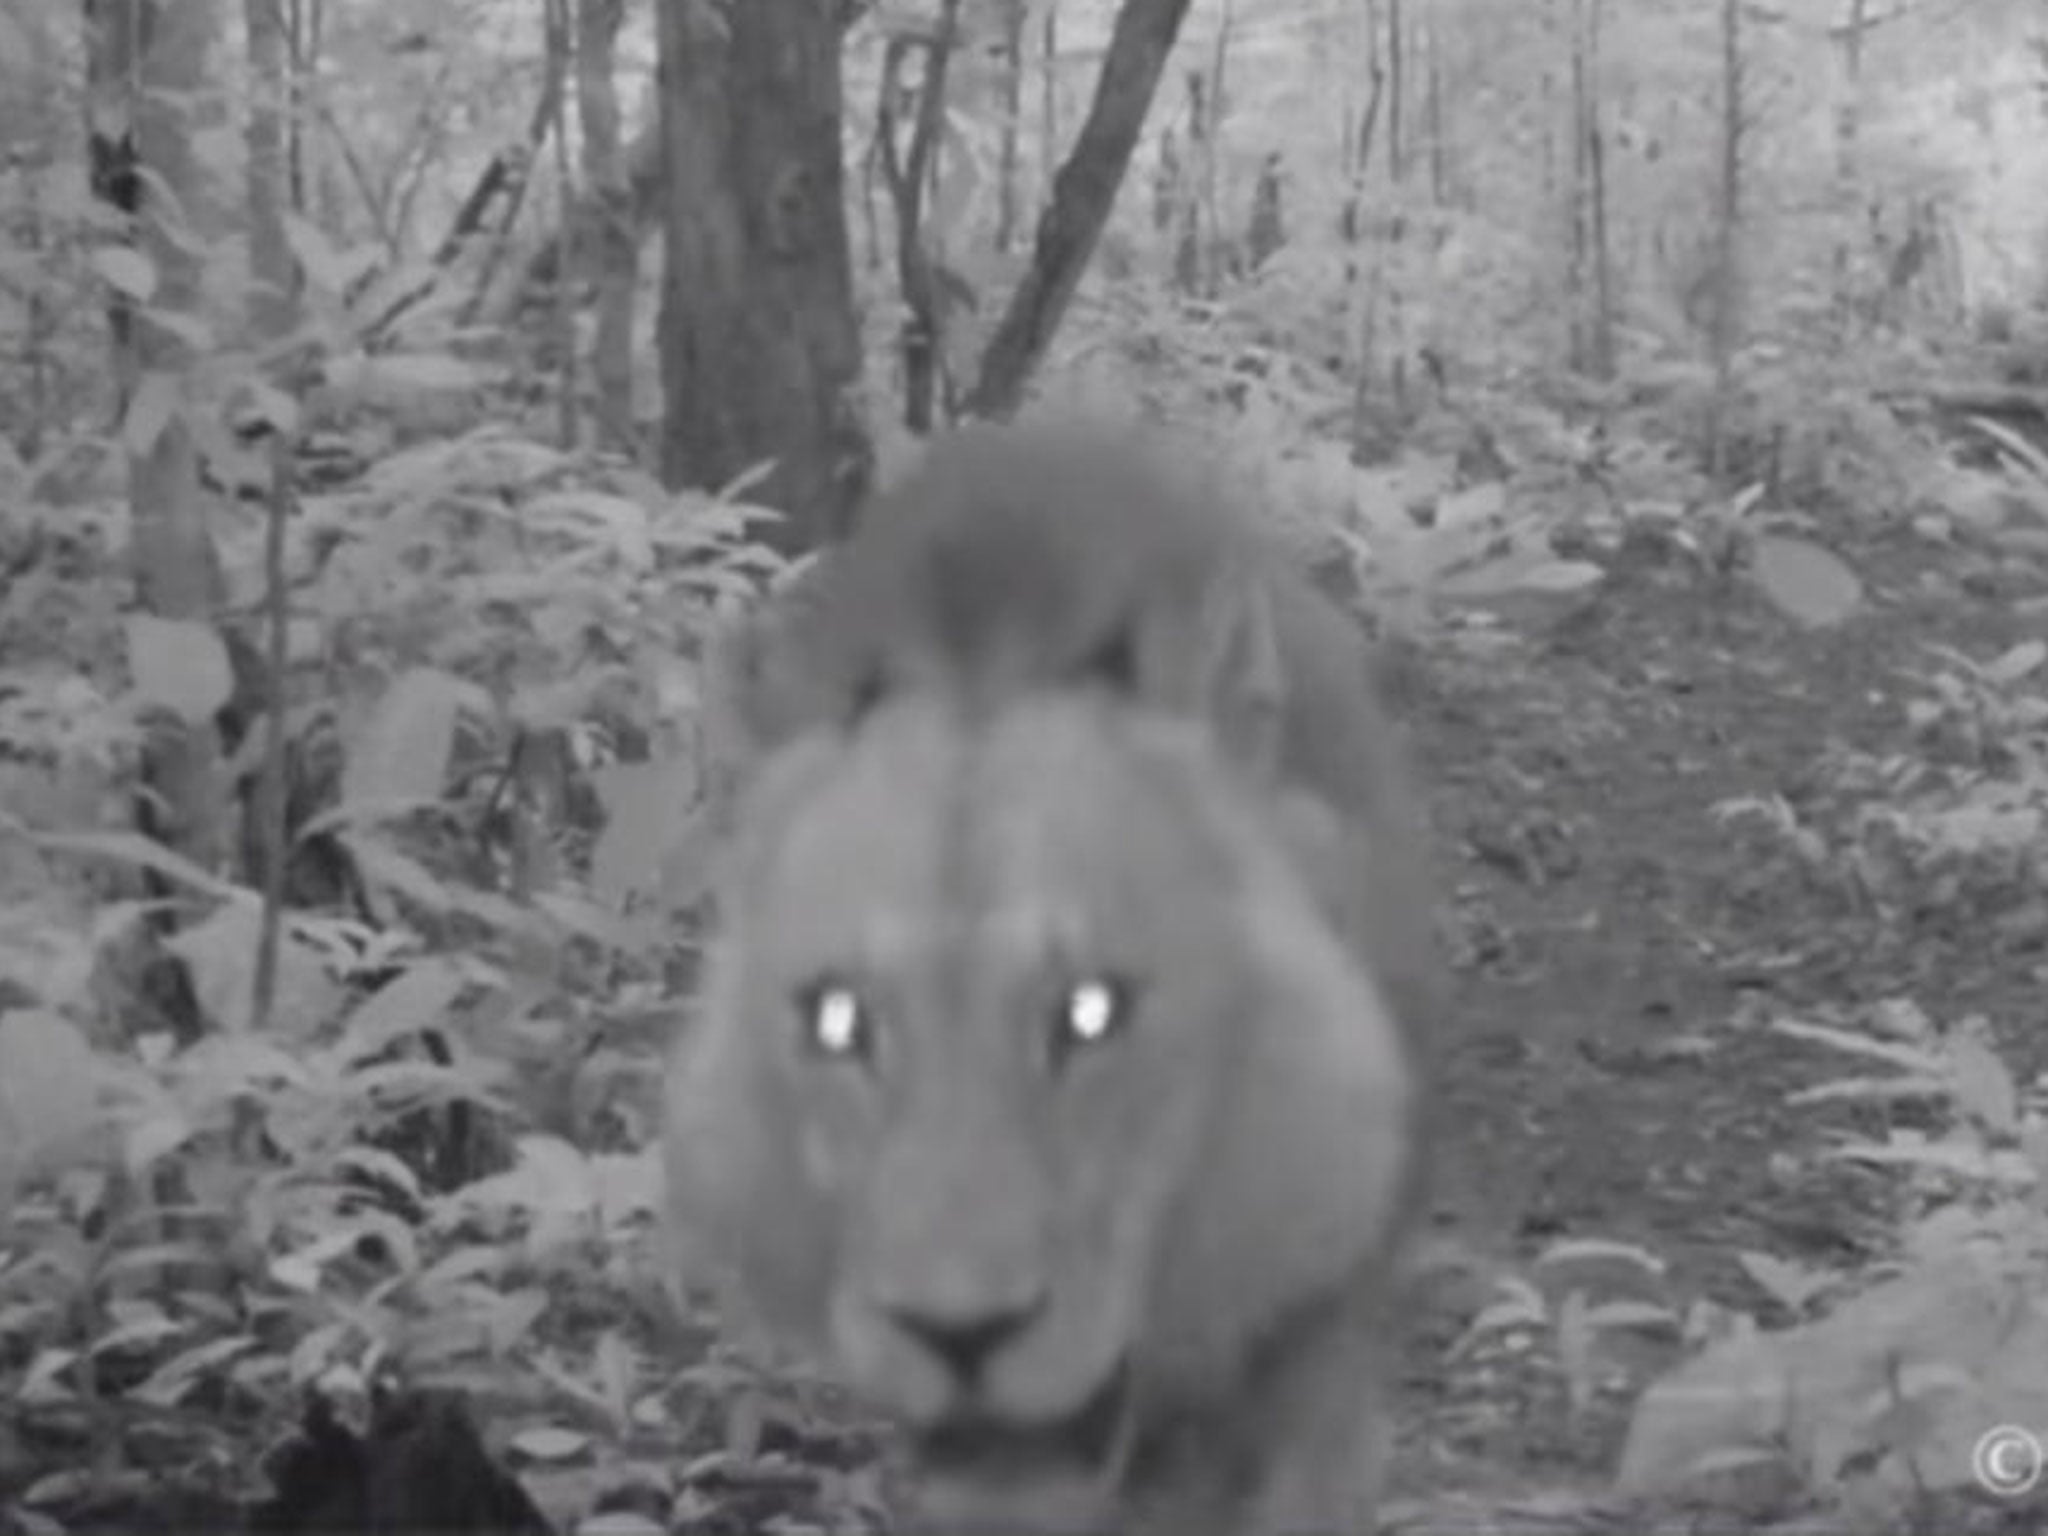 A lion has been spotted in the West African nation of Gabon for the first time in 20 years